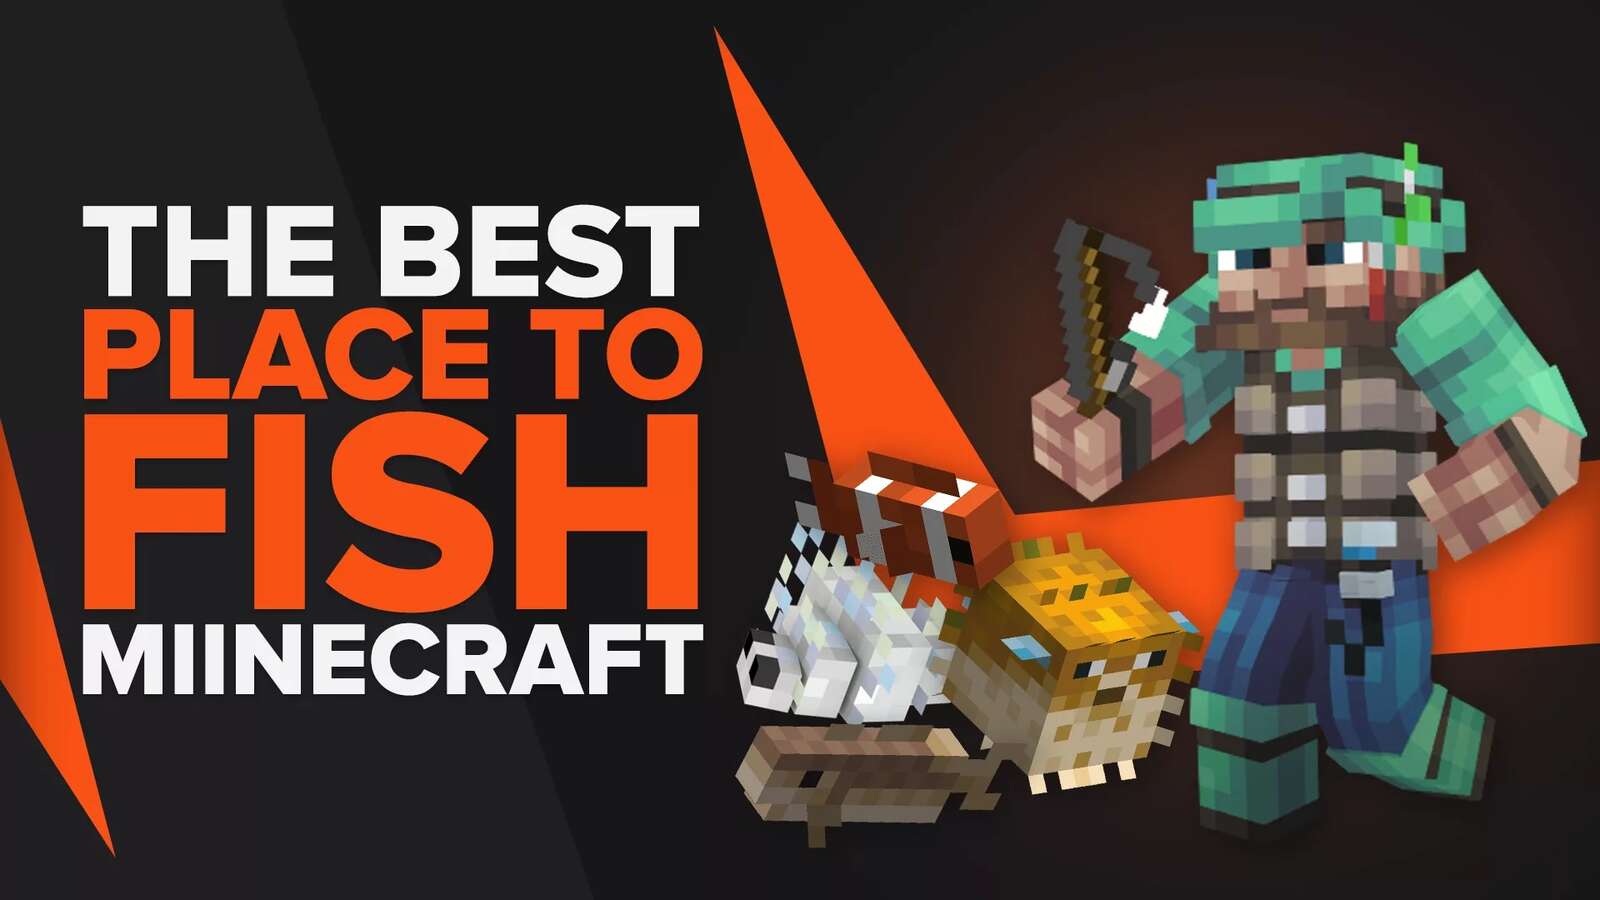 What Is The Best Place to Fish in Minecraft? [Answered]